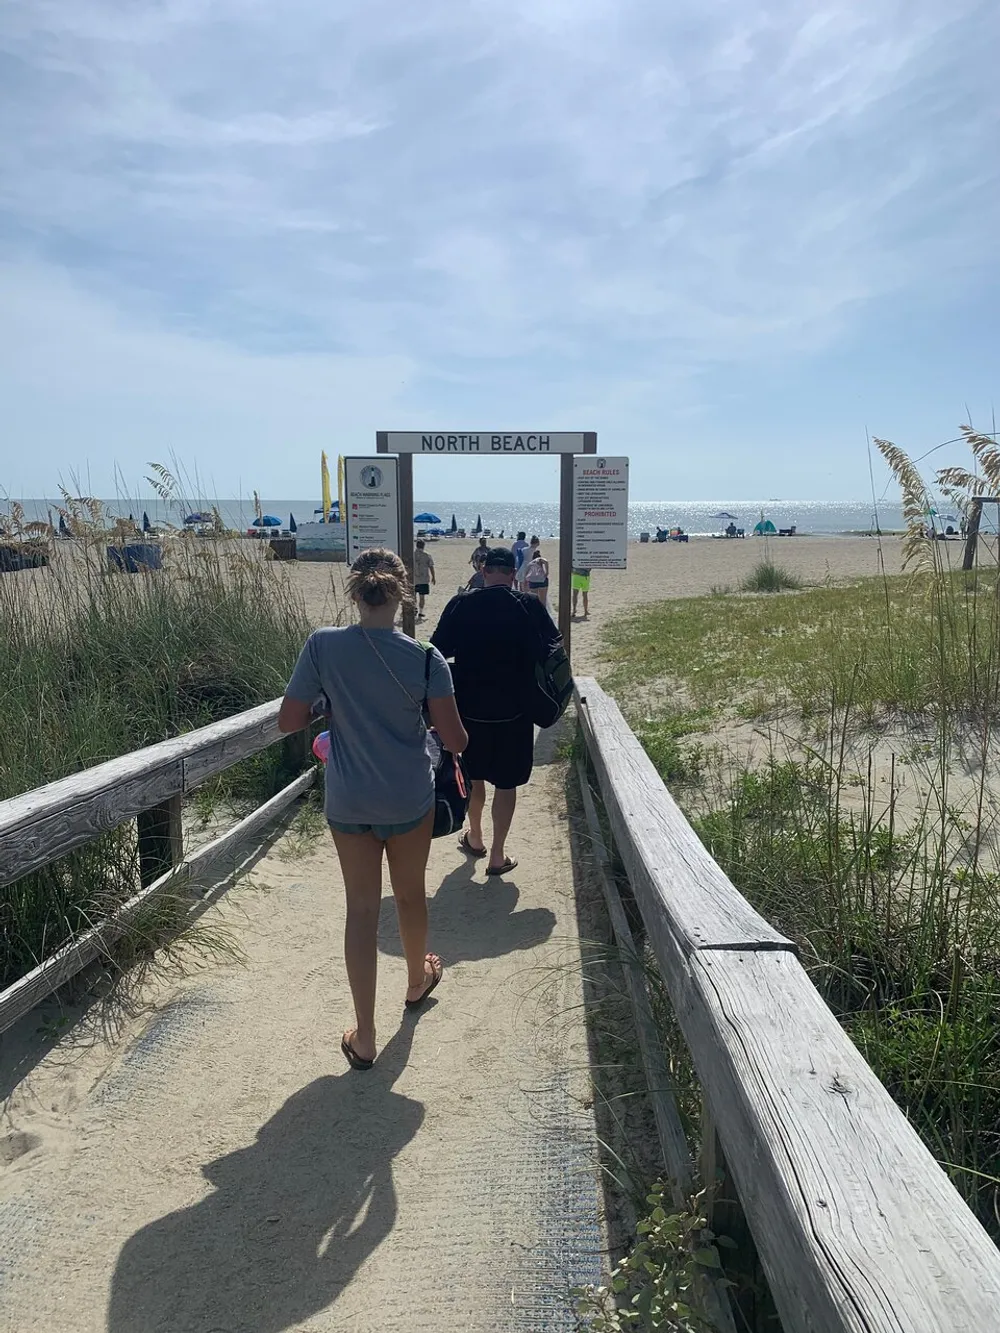 People are walking on a sandy boardwalk leading to North Beach on a sunny day